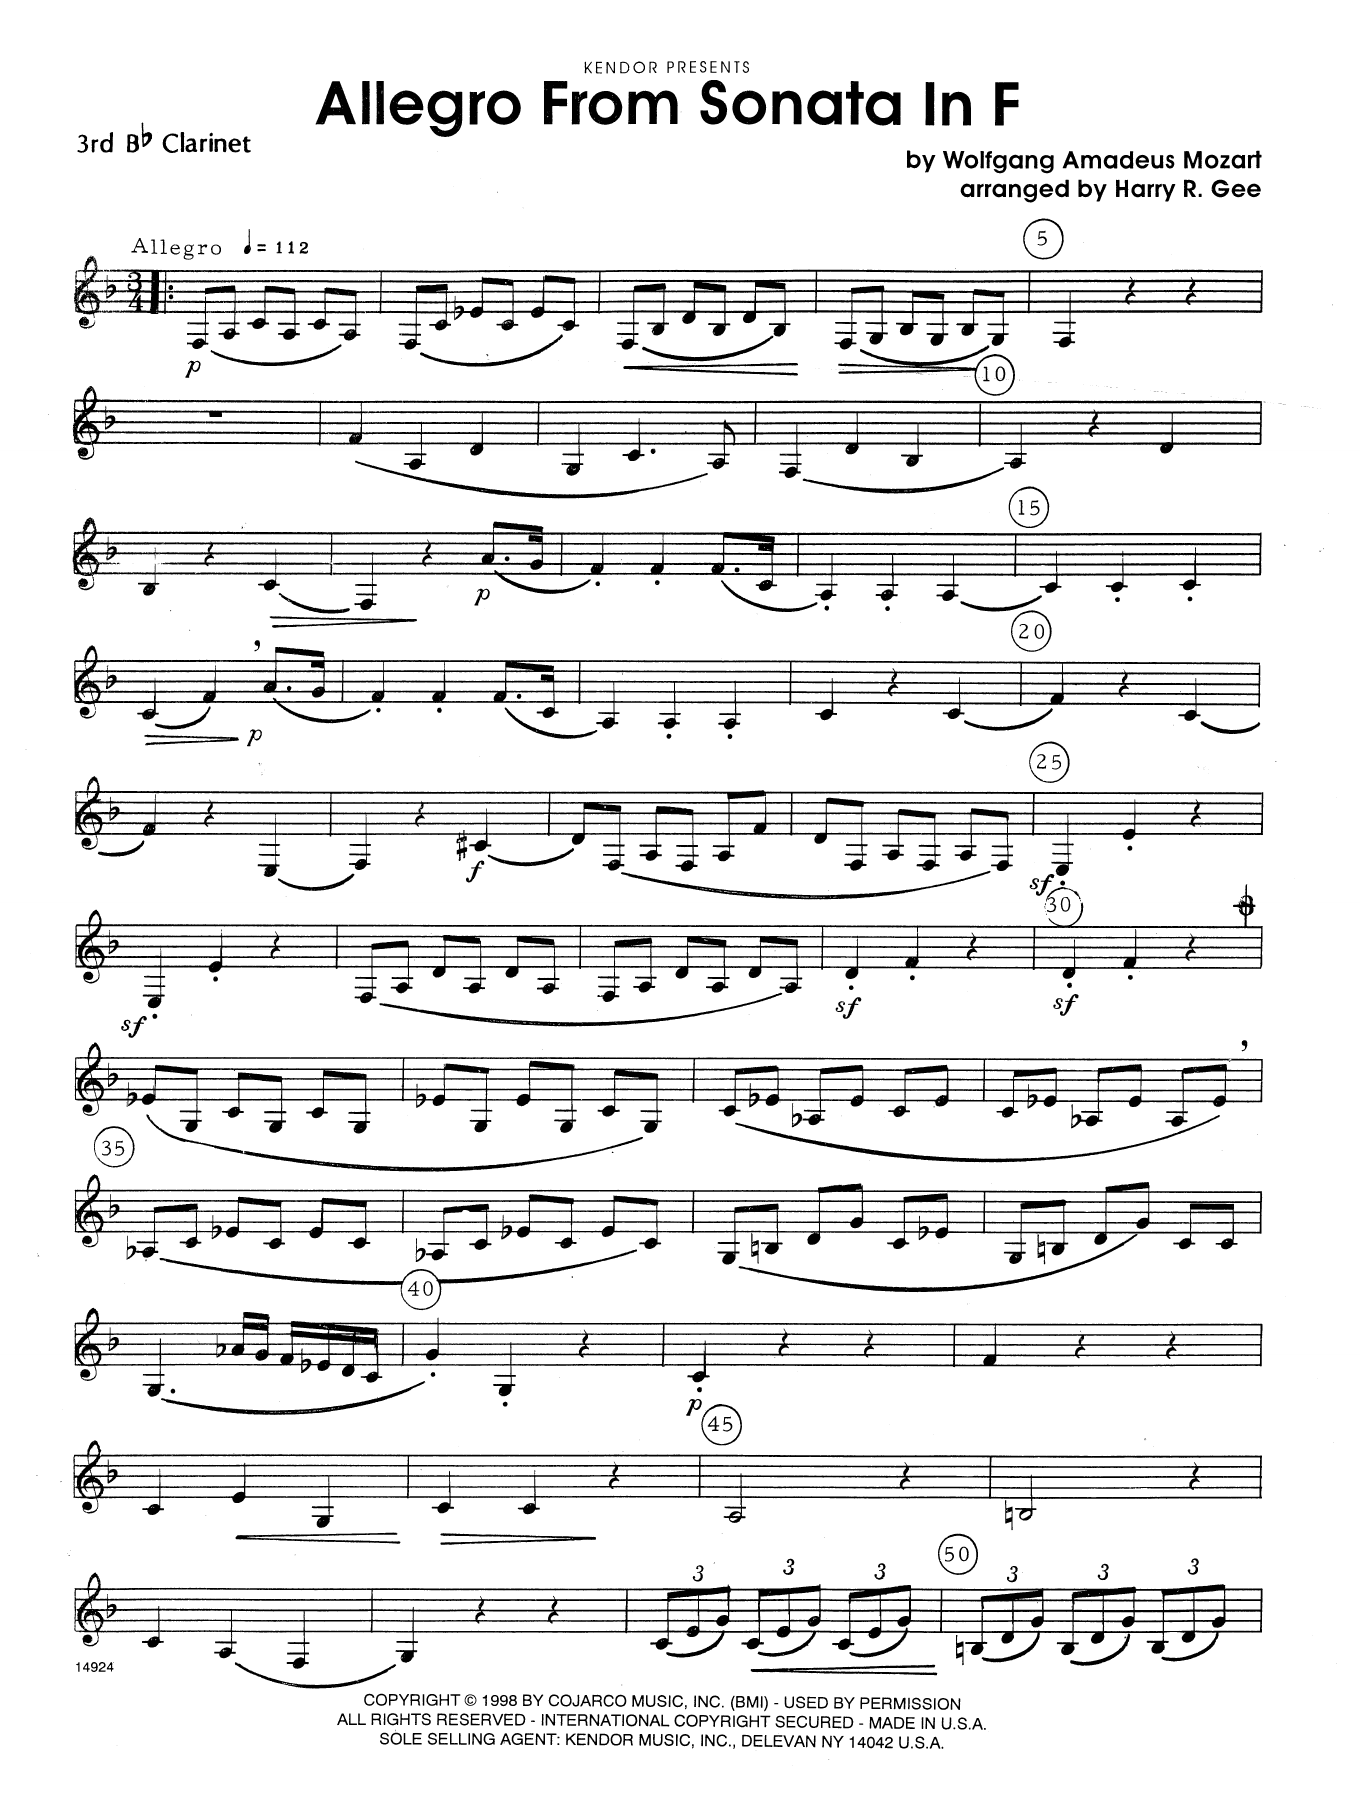 Download Harry Gee Allegro From Sonata In F - 3rd Bb Clari Sheet Music